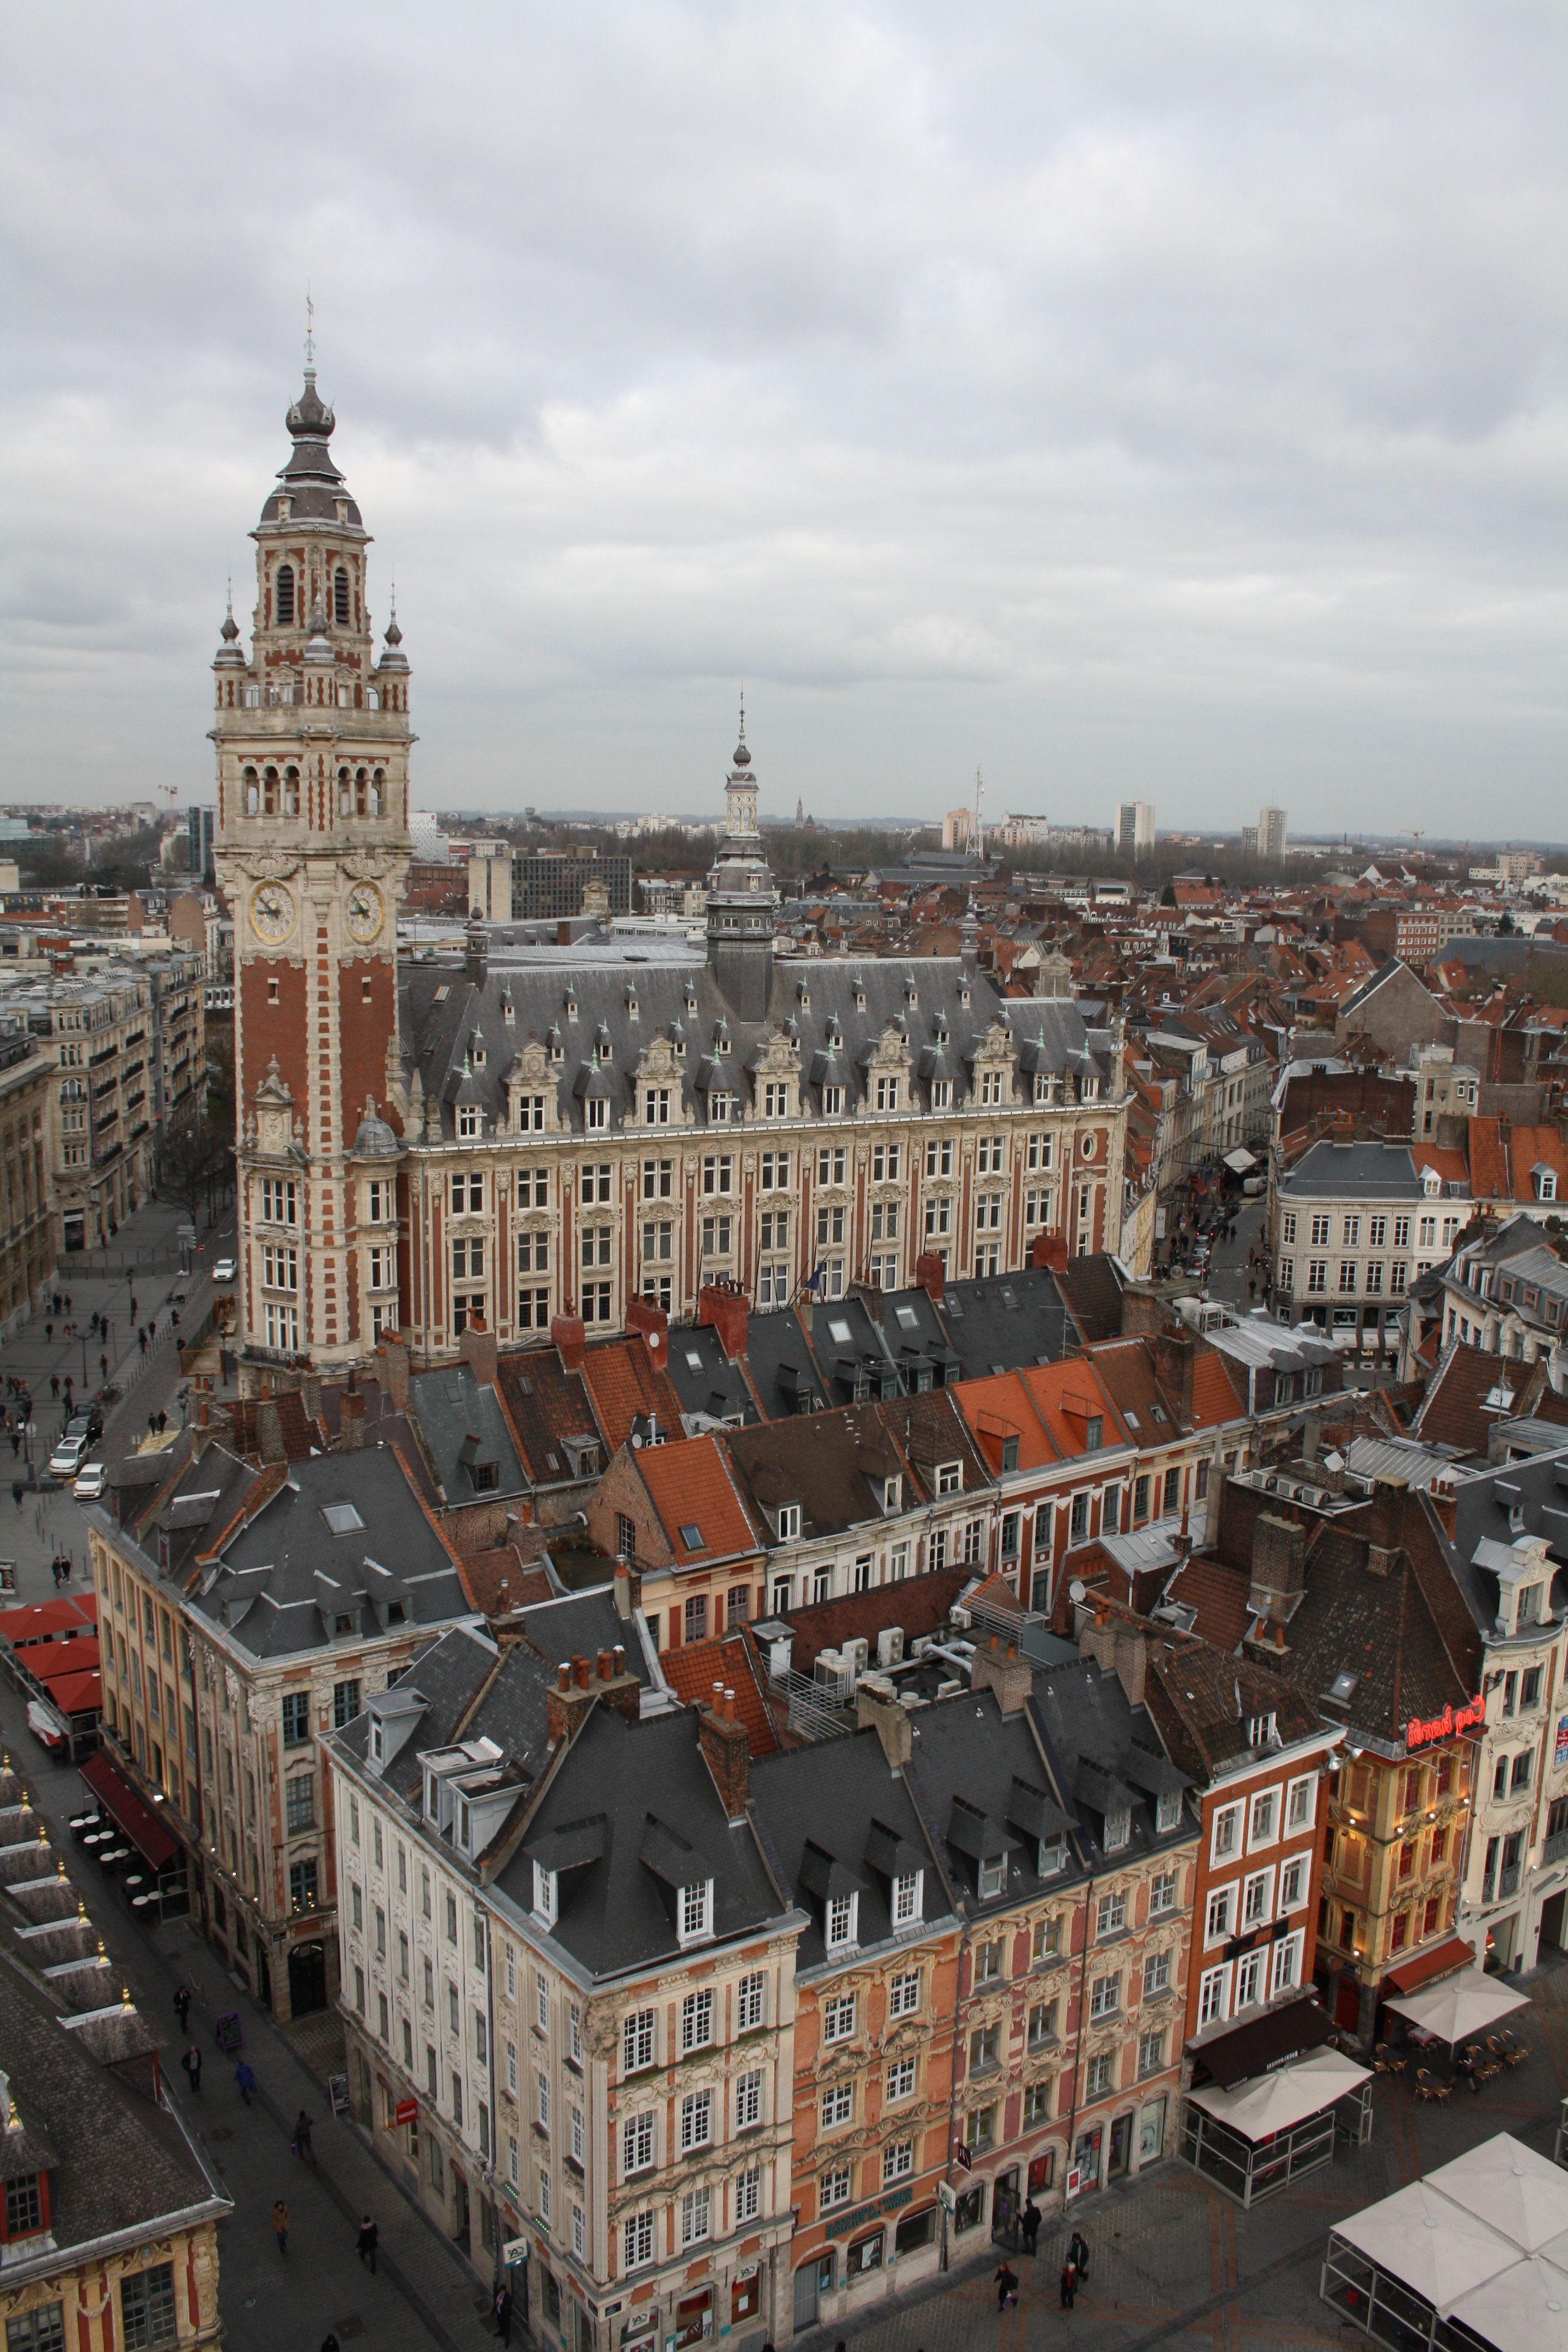 2. Grand Place